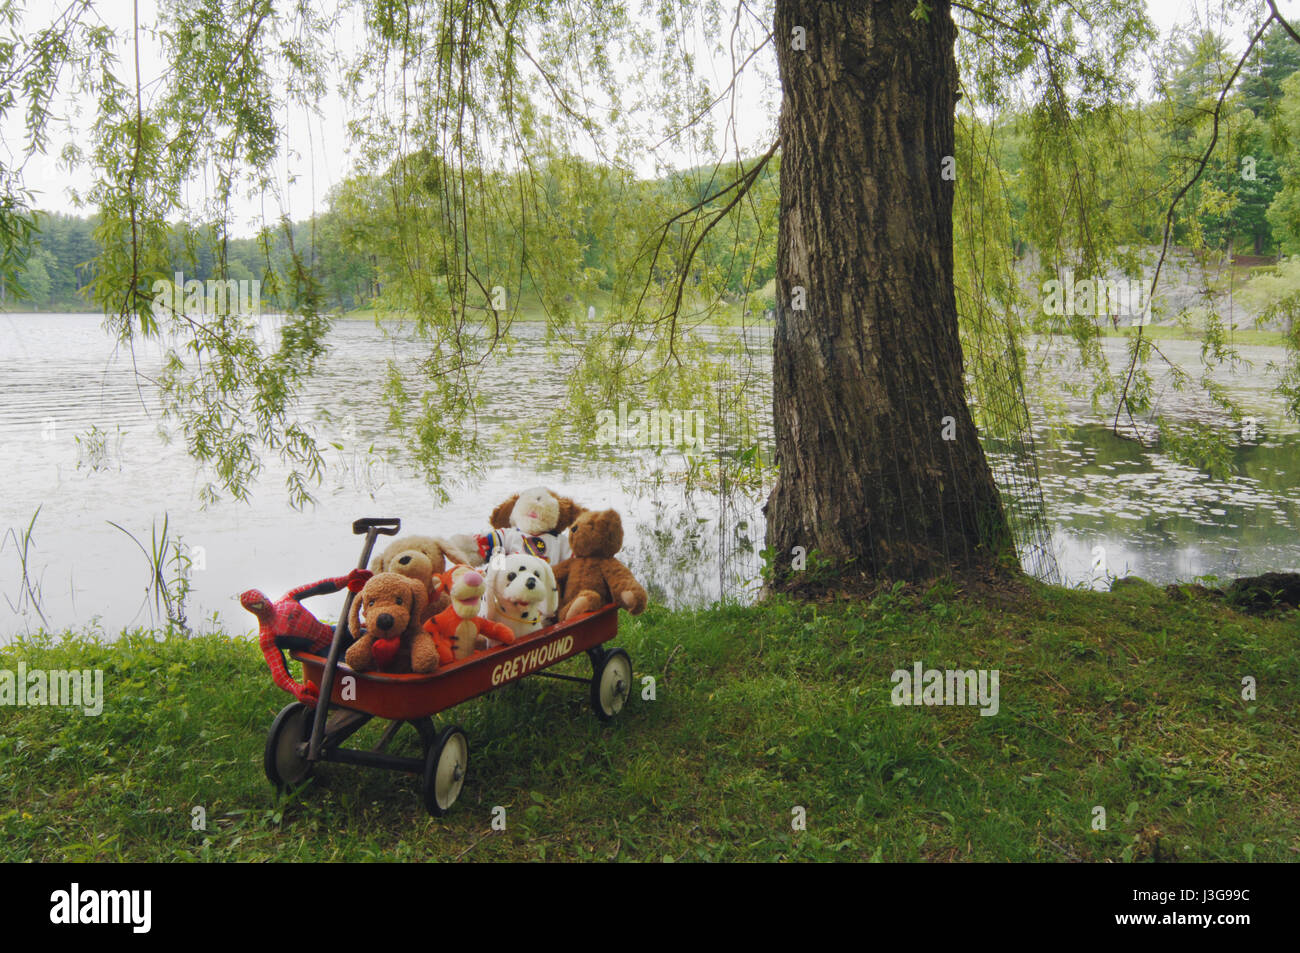 Red wagon filled with stuffed animals near willow tree on lake shore Stock Photo